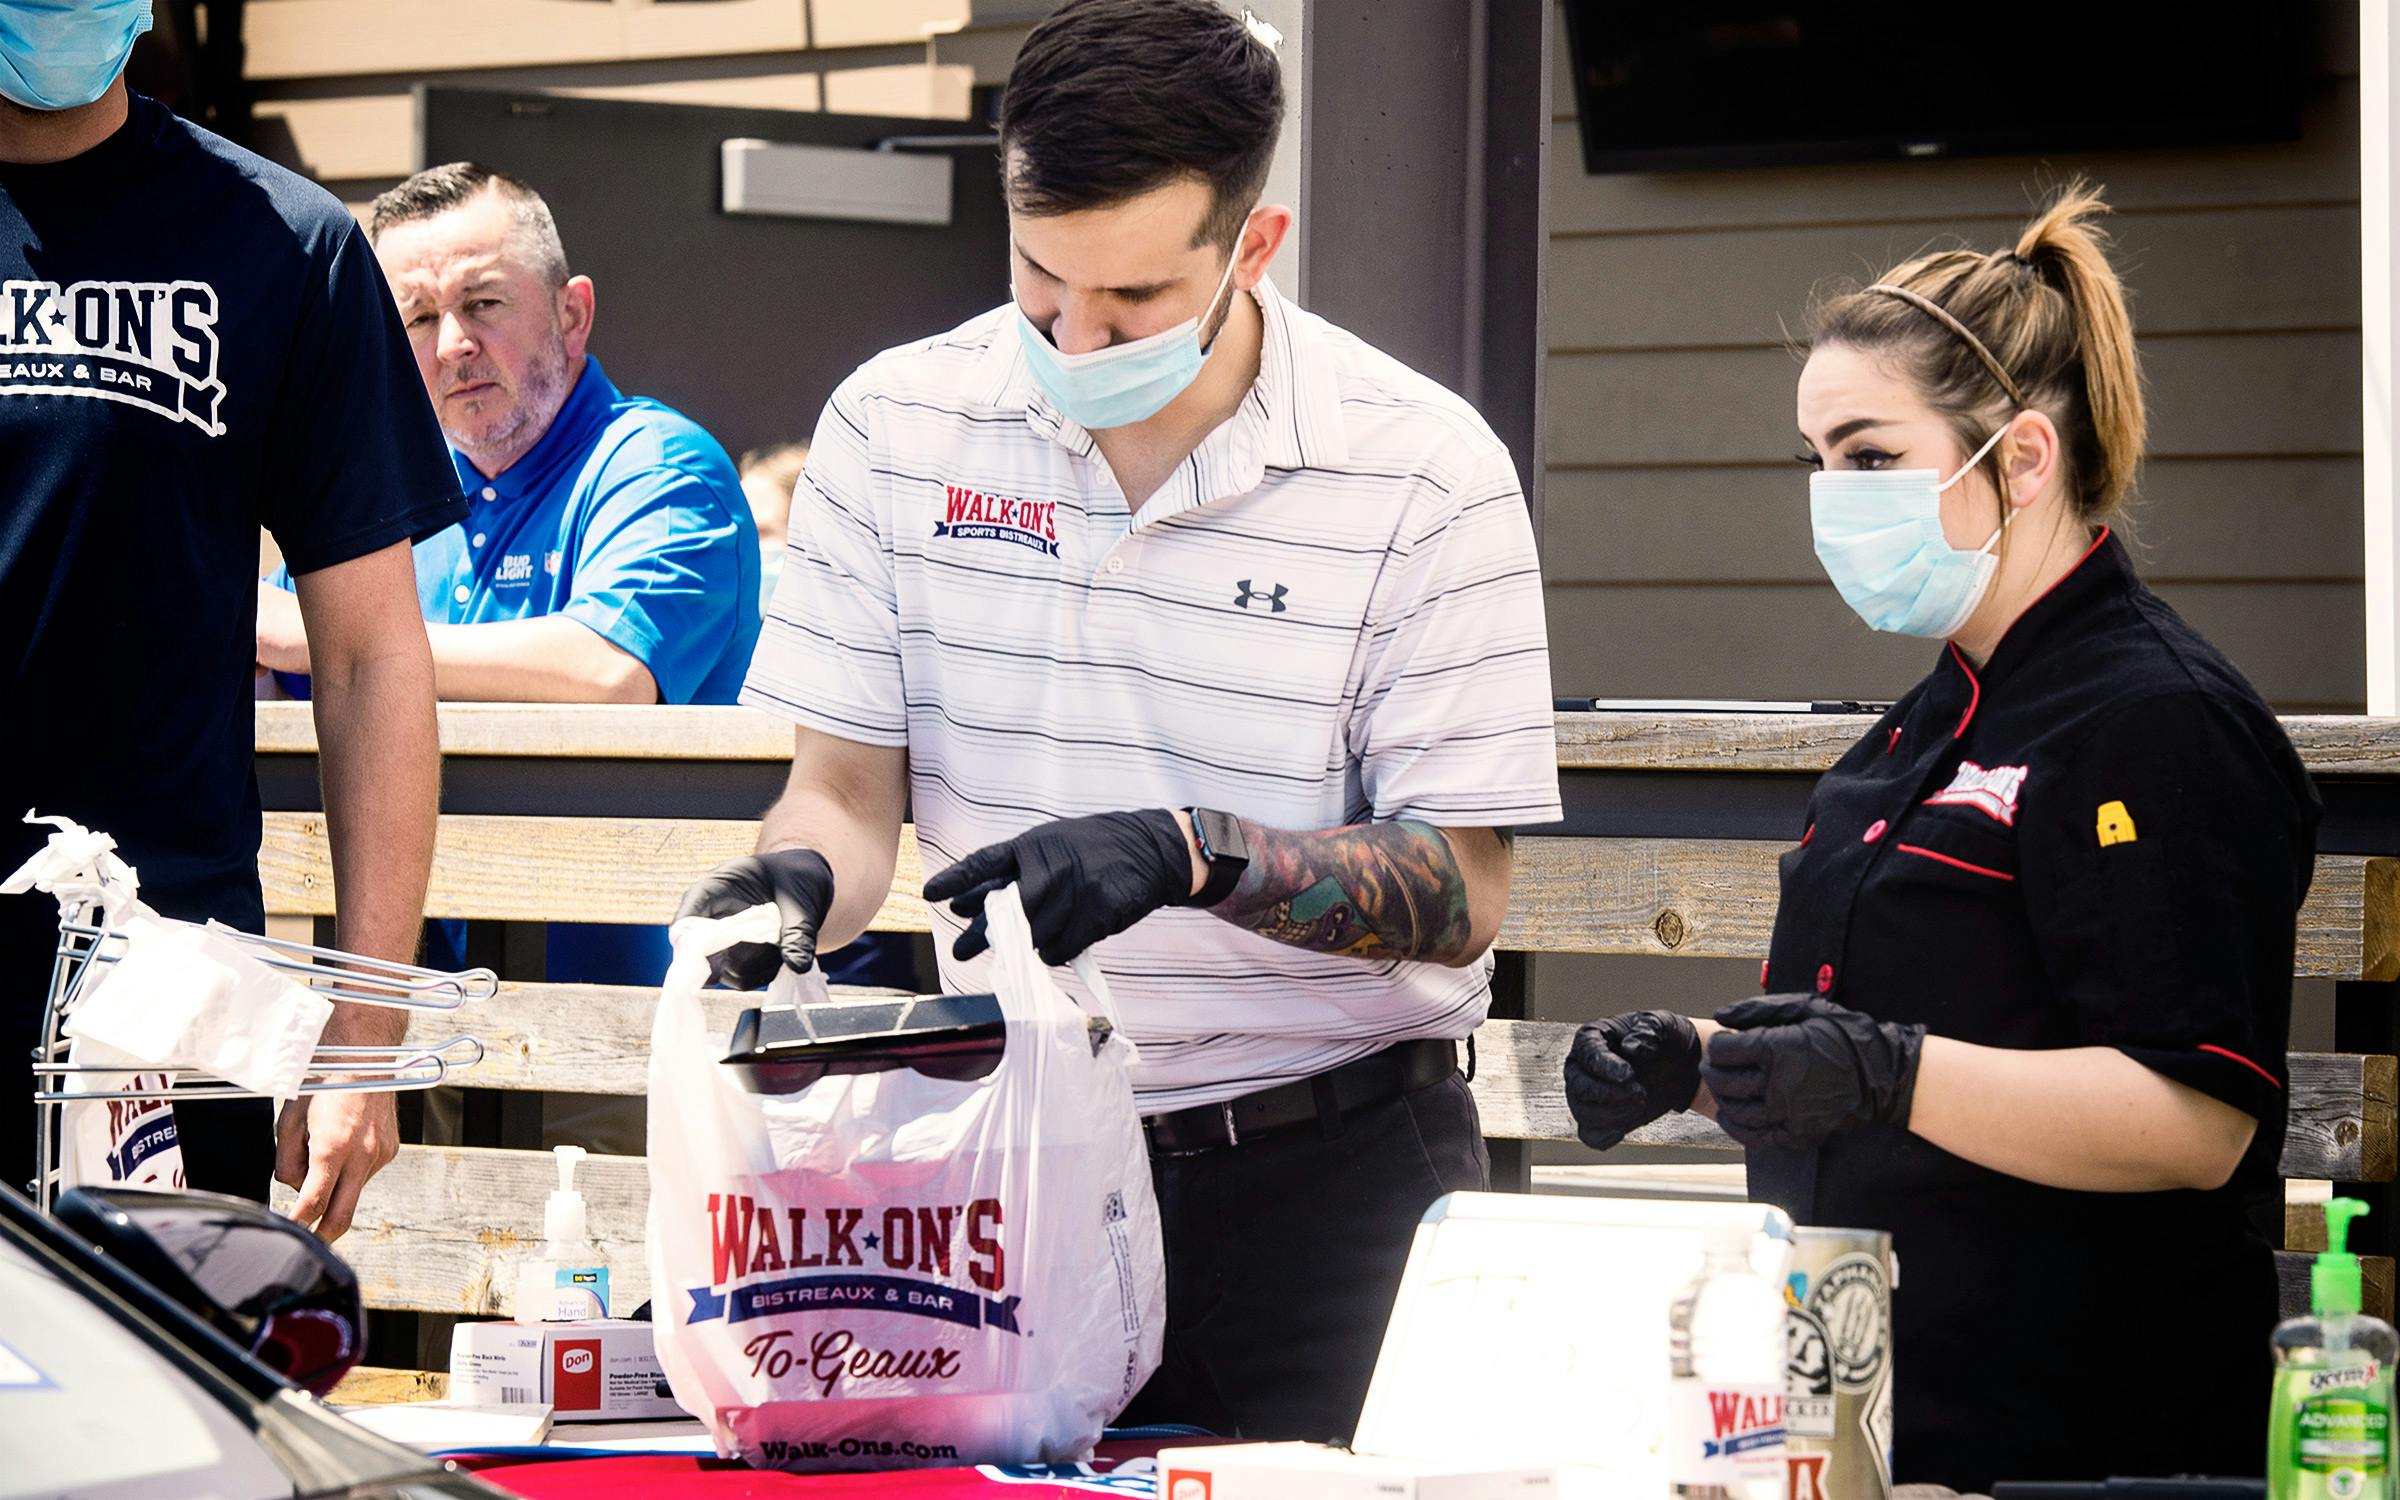 Walk-On's Sports Bistreaux general manager Fernando Guzman and executive kitchen manager Presley Parker bag meals to hand out during the restaurant's Furlough Kitchen by Walk-On's event in Tyler on April 30, 2020.